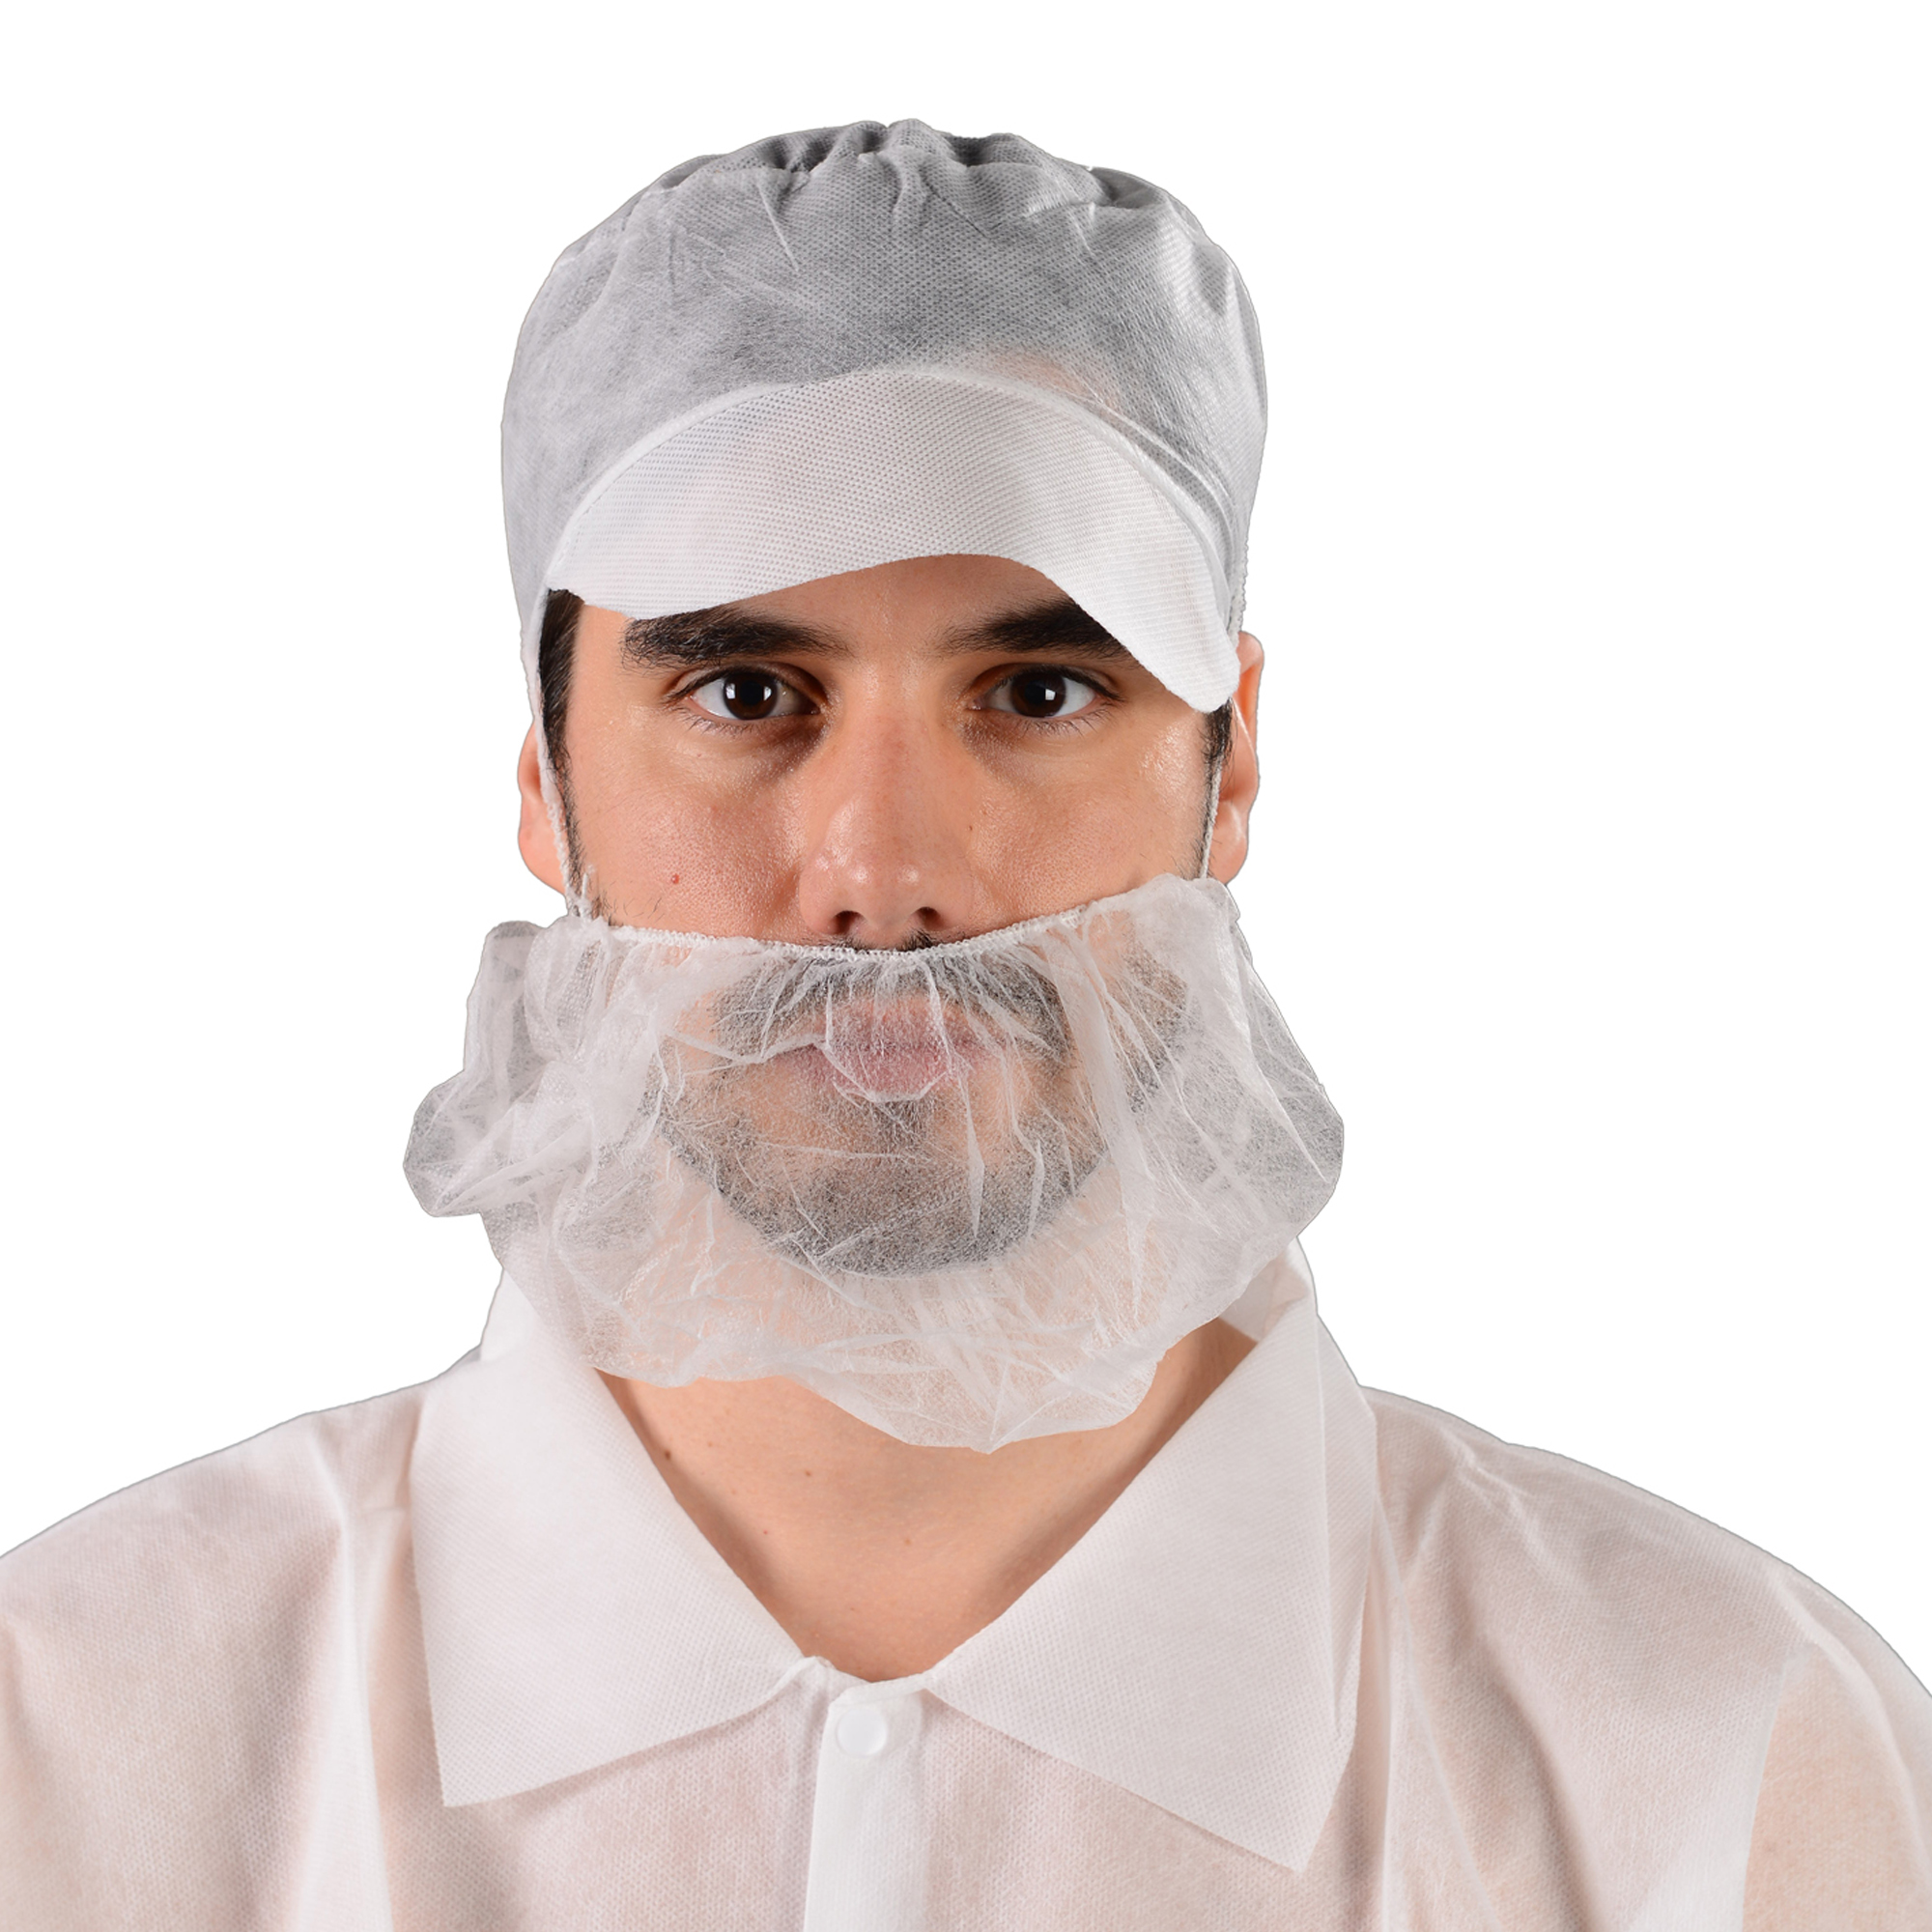 TOPMED Disposable PP Nonwoven Beard Cover White 10gsm Food Industry Single Loop Men with Single Rib Dust Proof Beard Hair Net